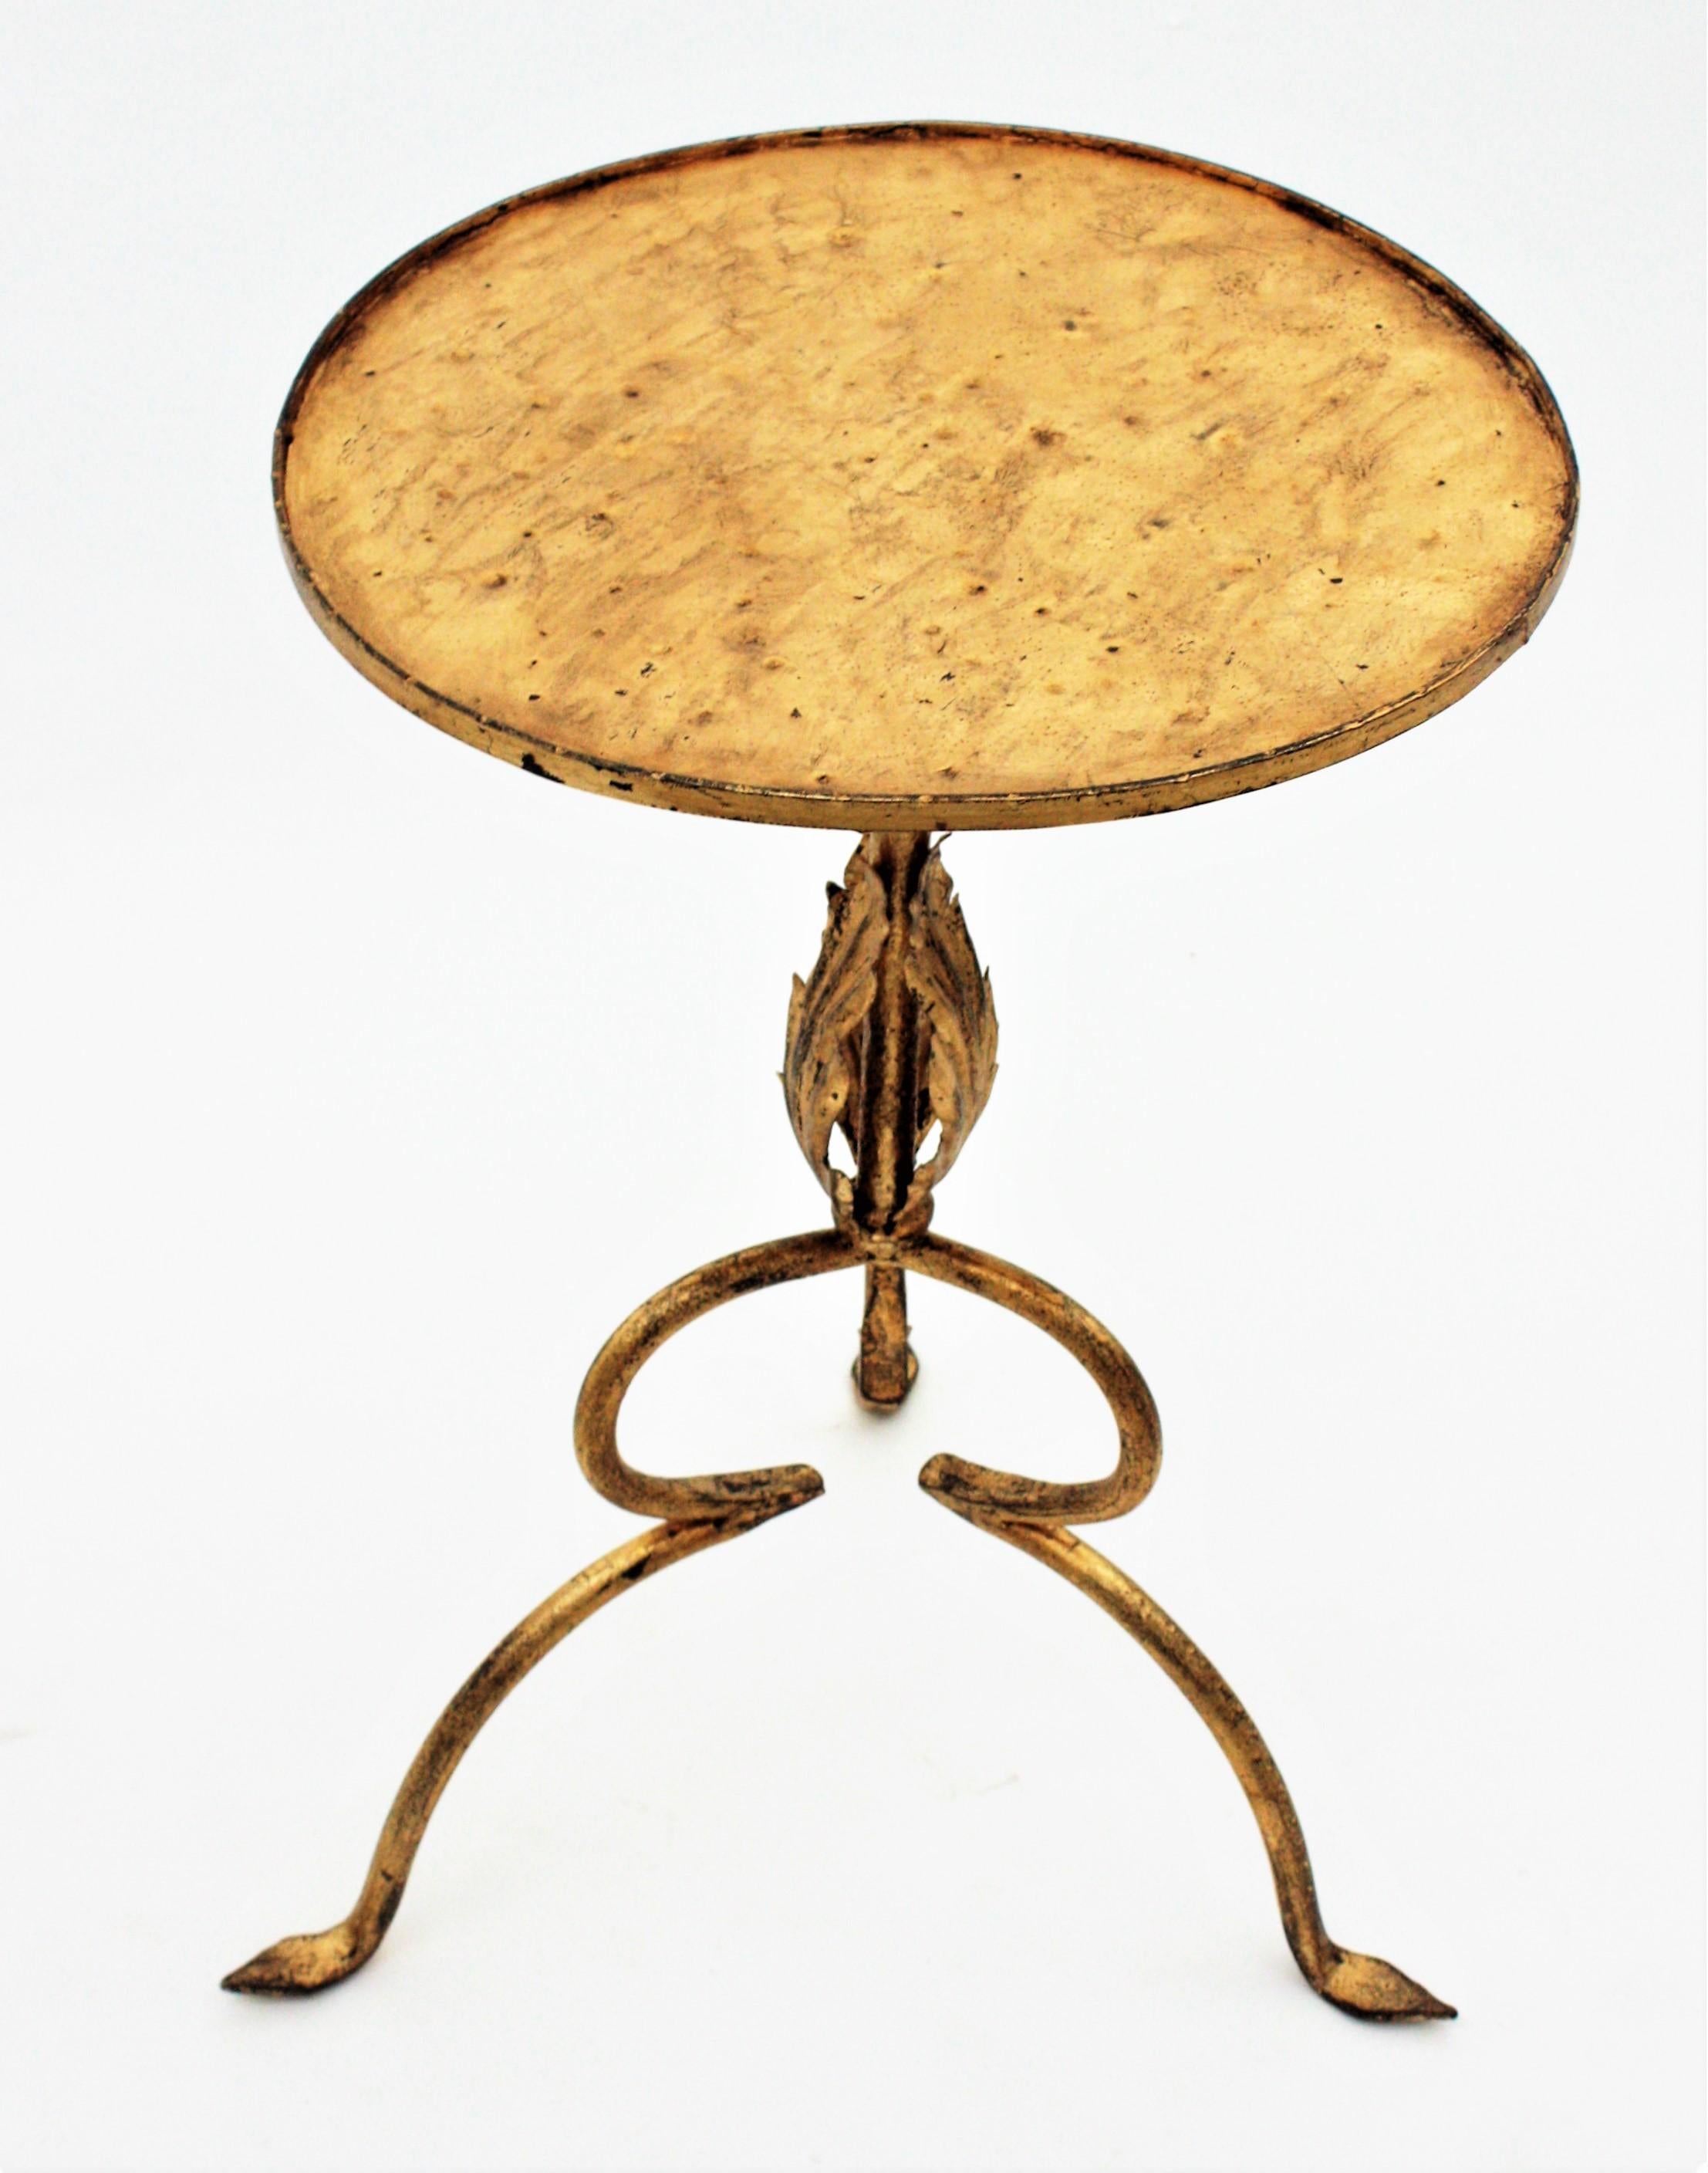 20th Century Spanish Gilt Wrought Iron Gueridon Drinks Table with Foliate Details, 1940s